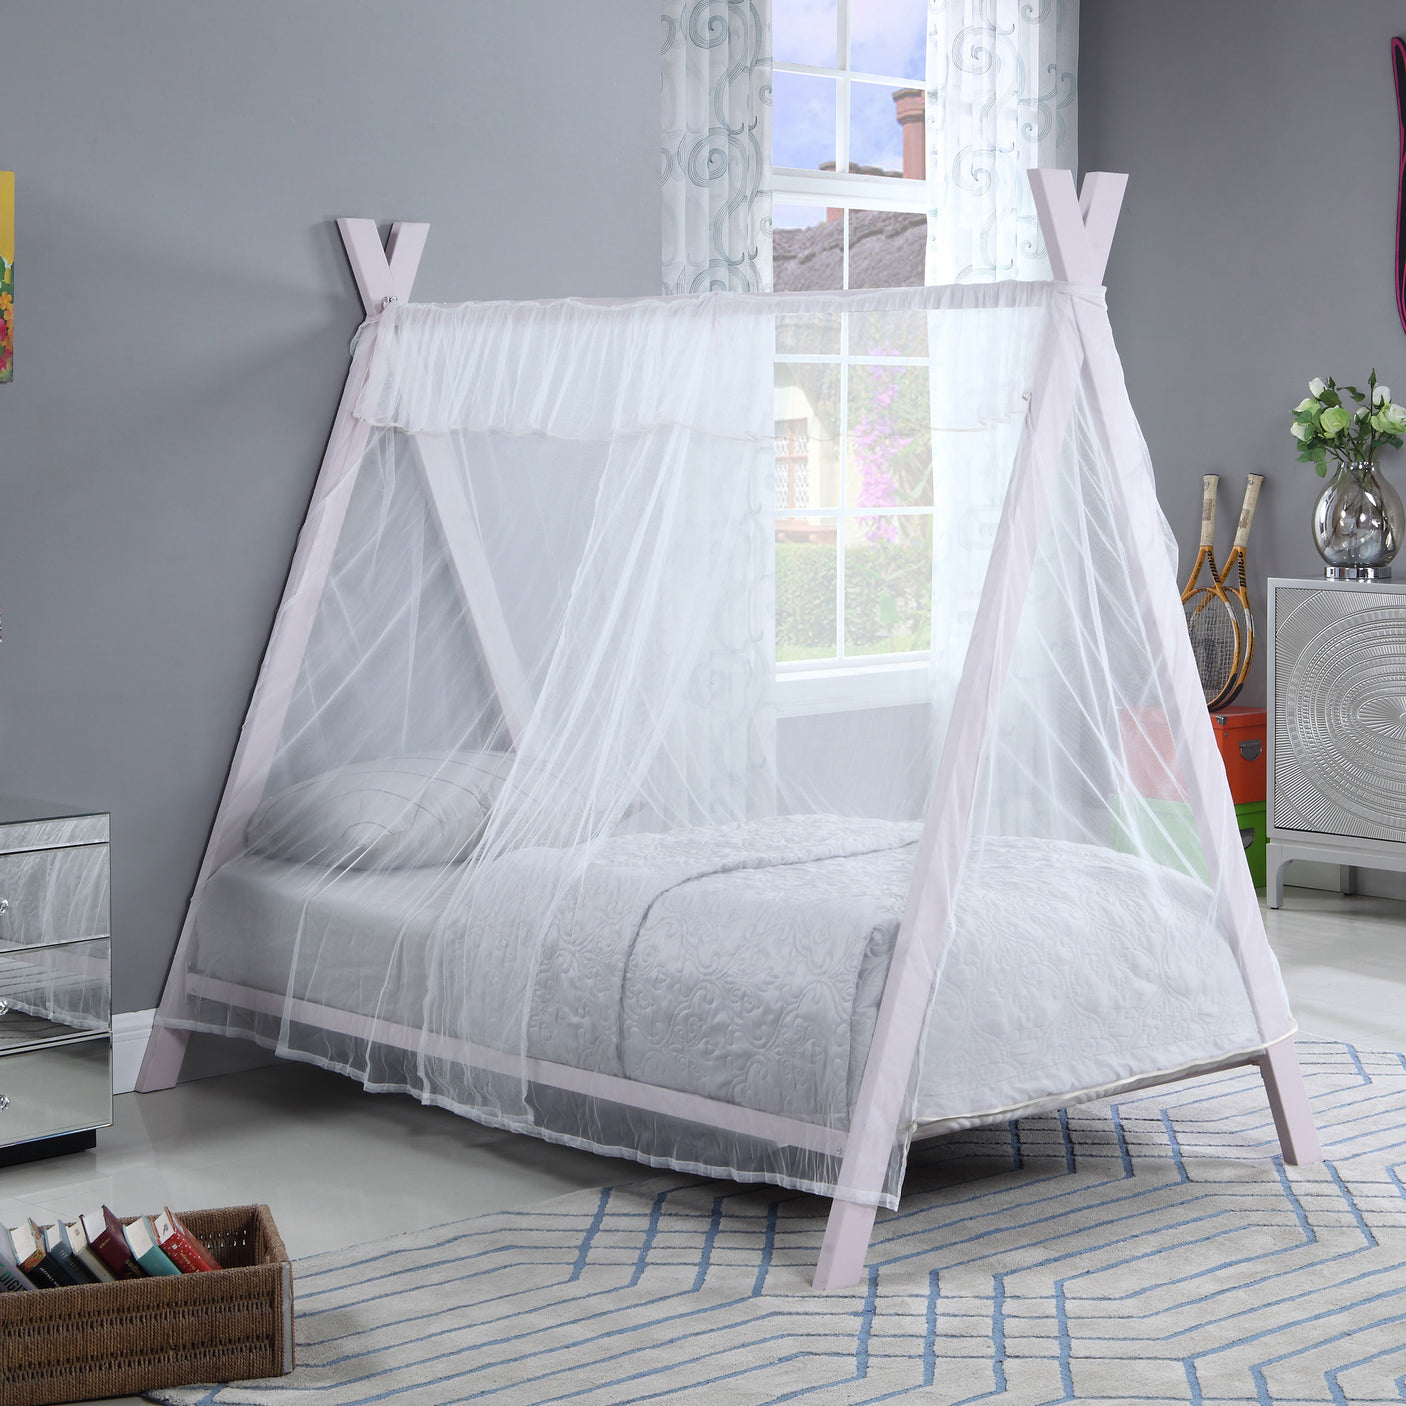 Twin Tent Bed - Fultonville Metal Twin Tent Bed Pink